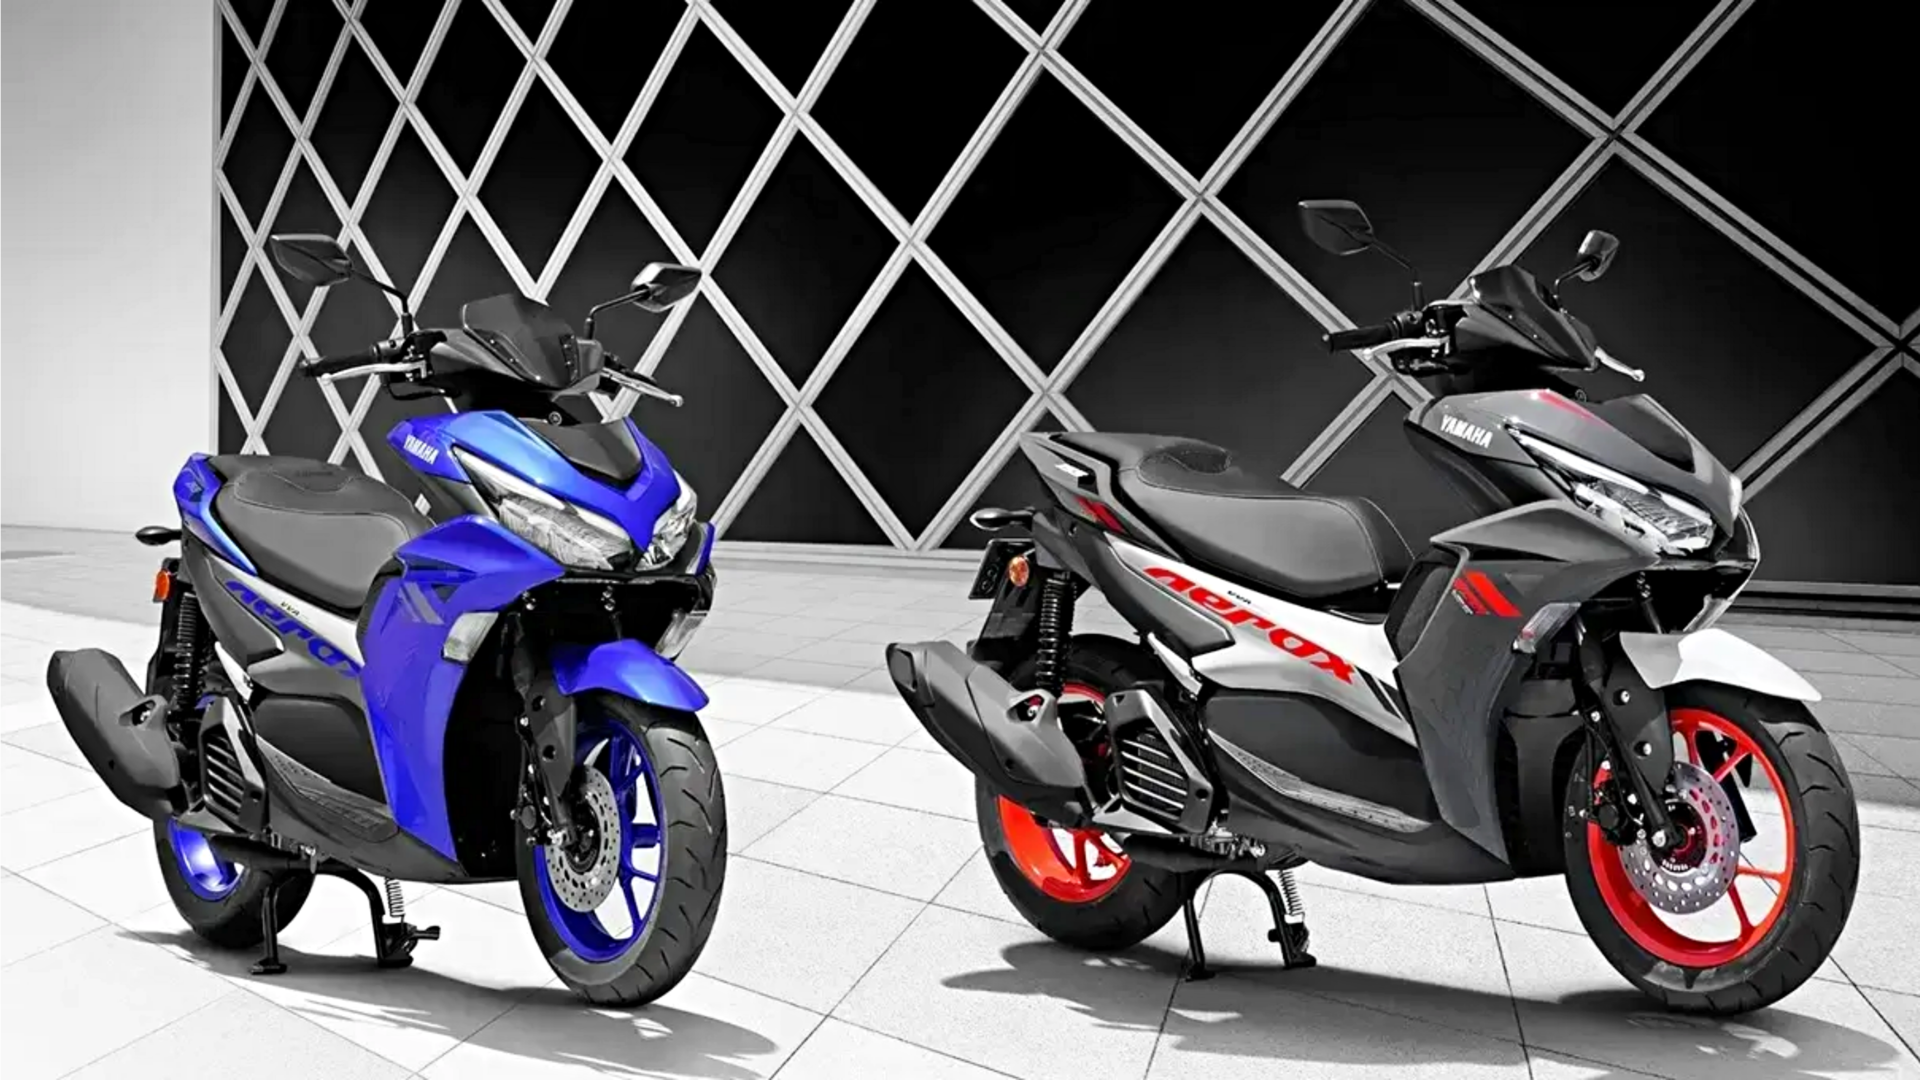 2023 Yamaha Aerox 155 scooter launched at Rs. 1.43 lakh